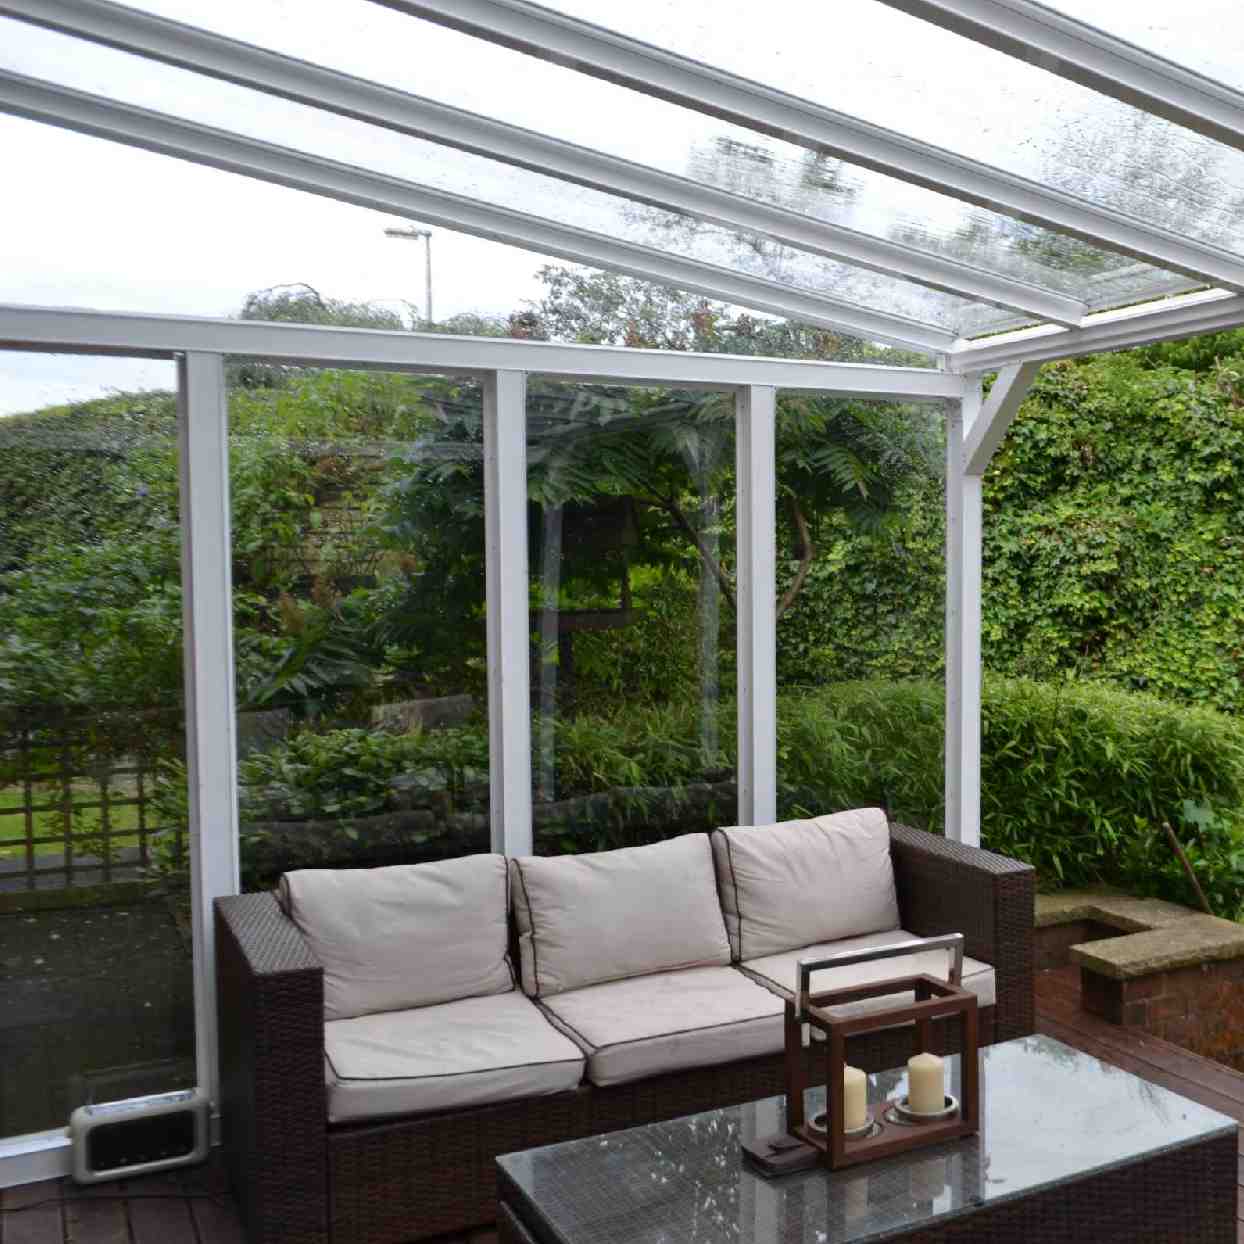 Buy Omega Verandah White with 16mm Polycarbonate Glazing - 9.6m (W) x 4.5m (P), (5) Supporting Posts online today